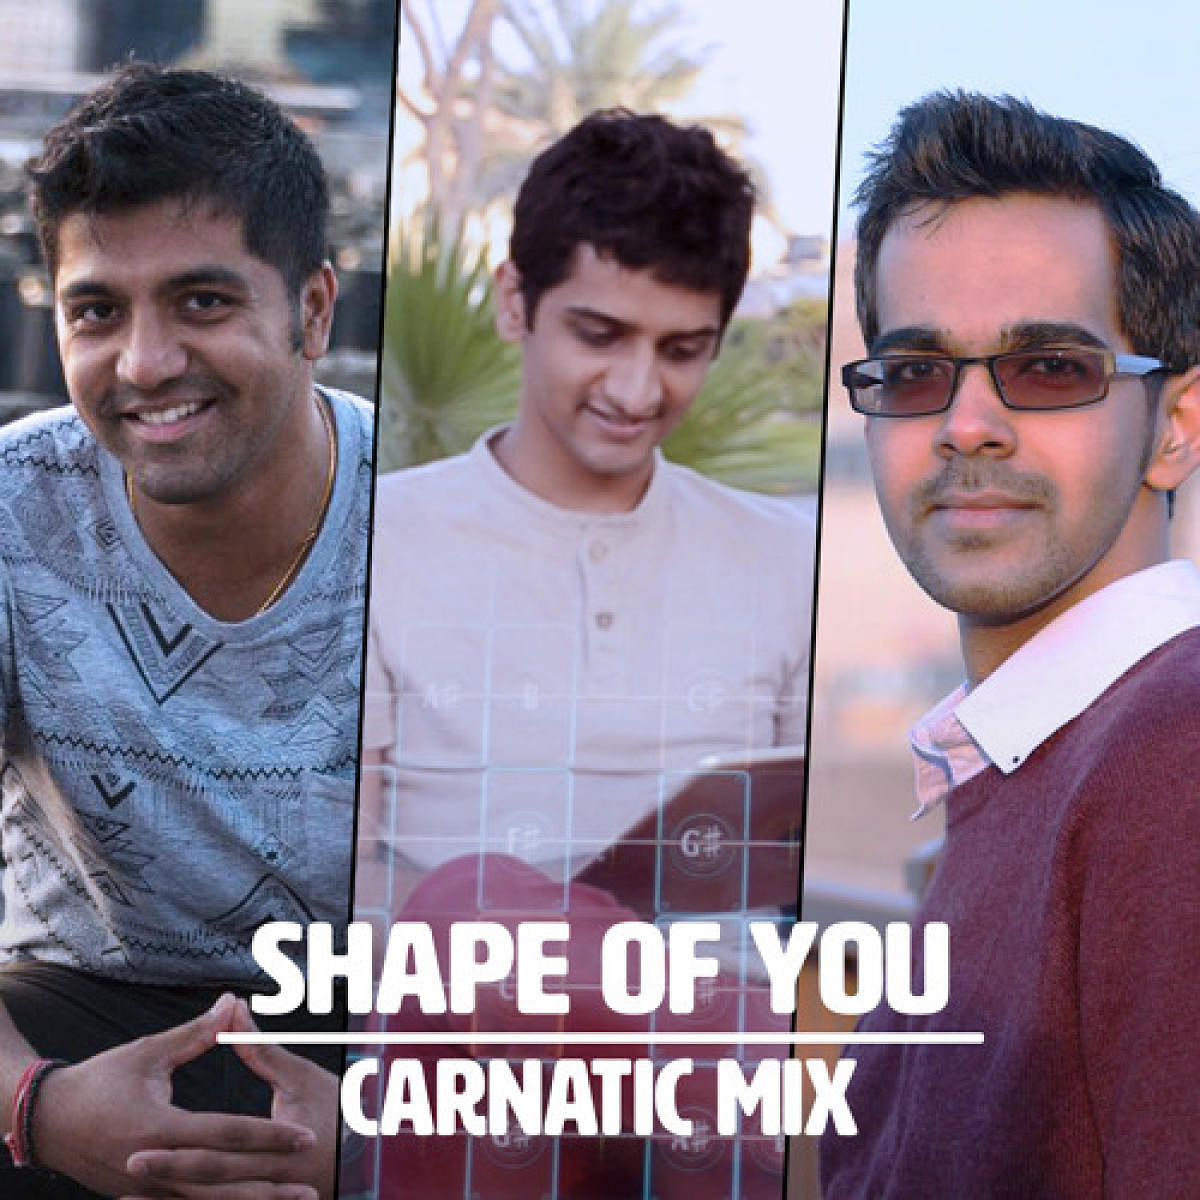 Shape of You with a Carnatic twist